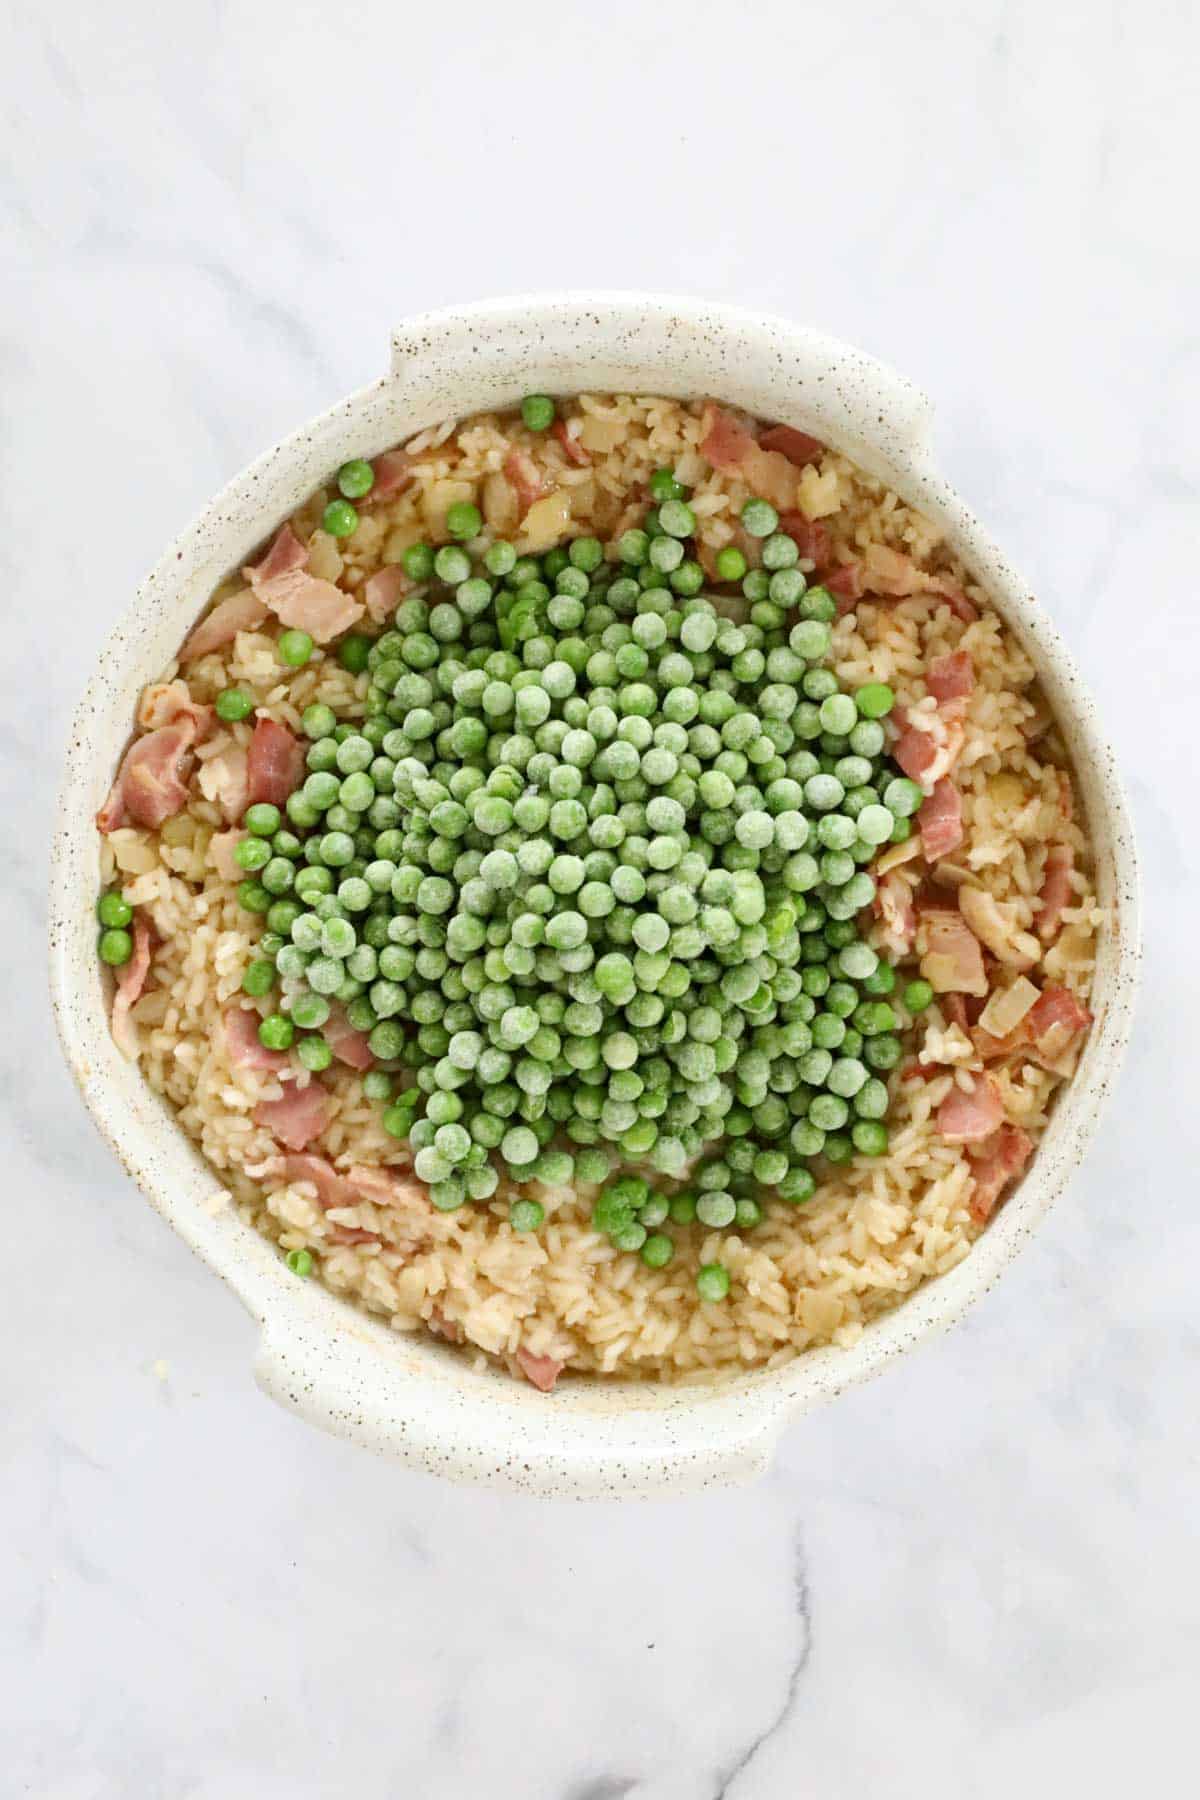 Frozen peas added to the risotto.